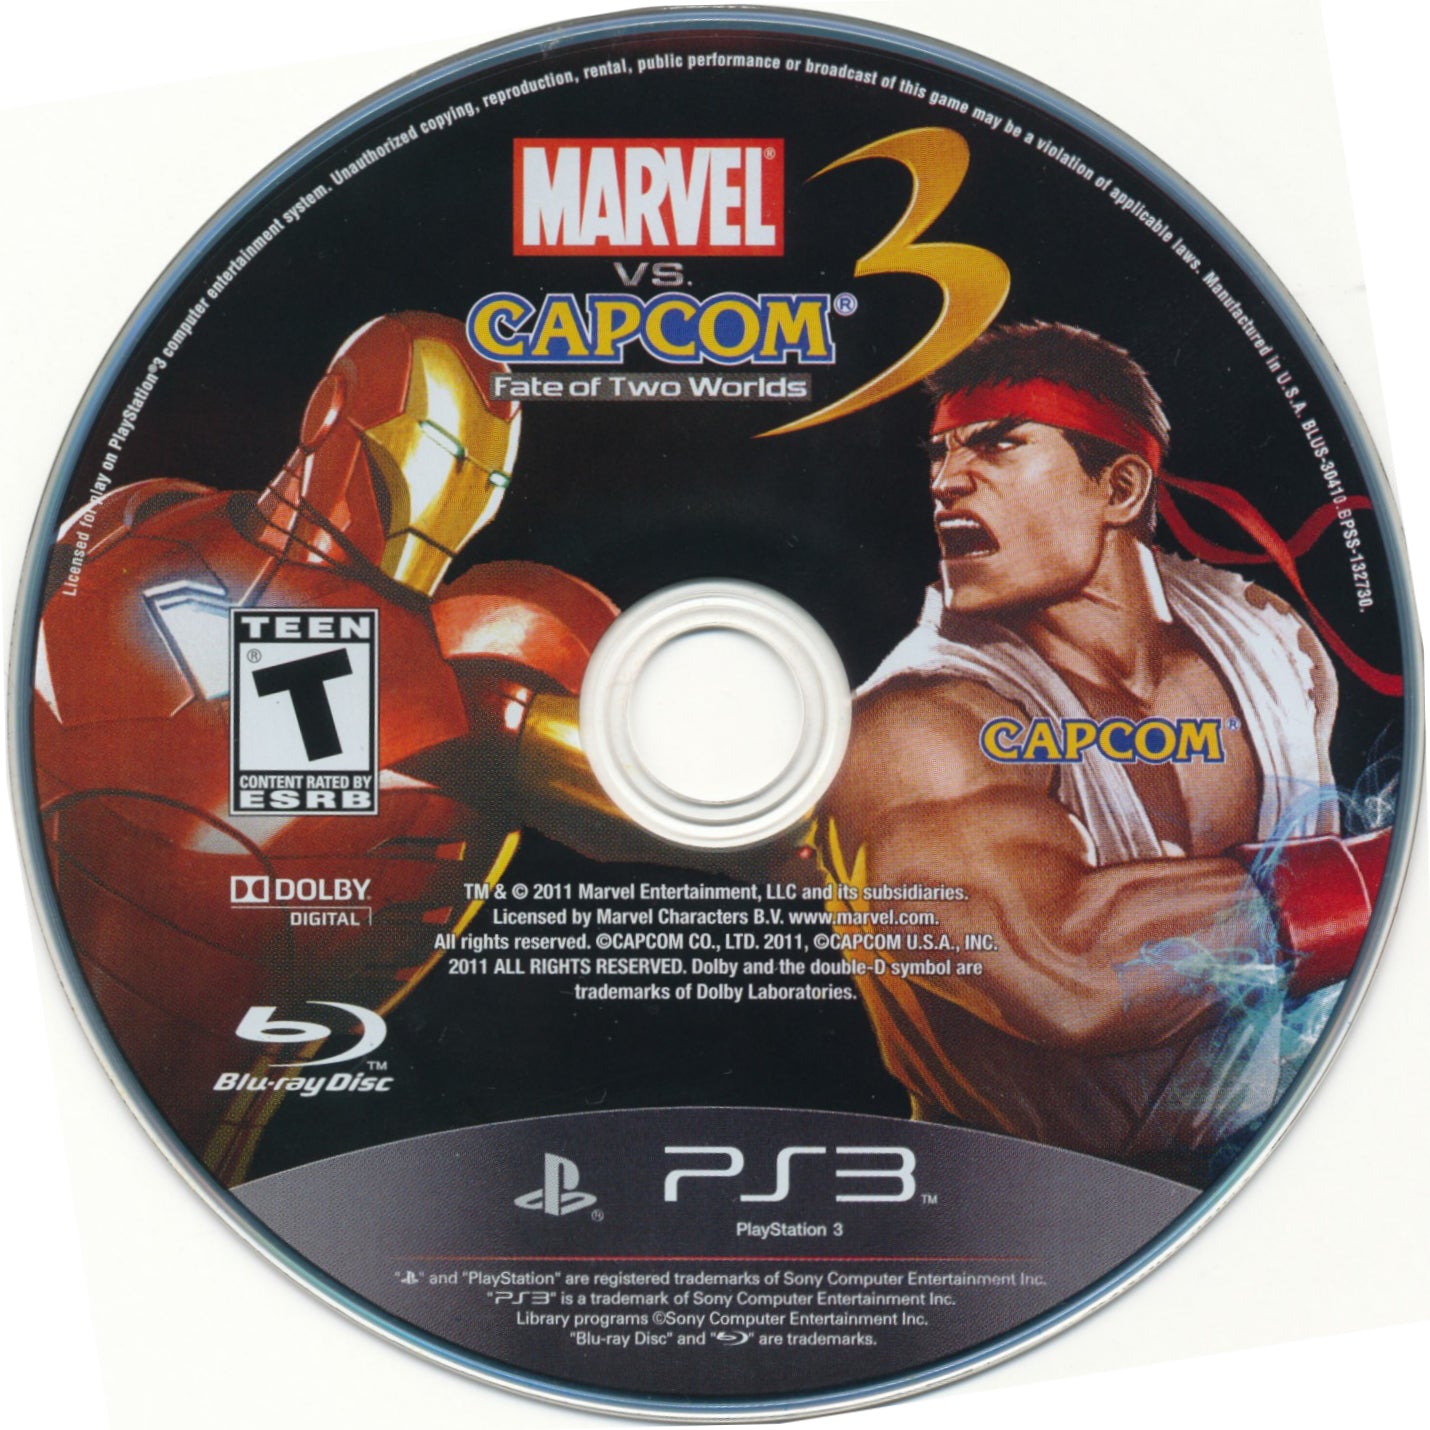 Marvel vs. Capcom 3: Fate of Two Worlds - PlayStation 3 (PS3) Game